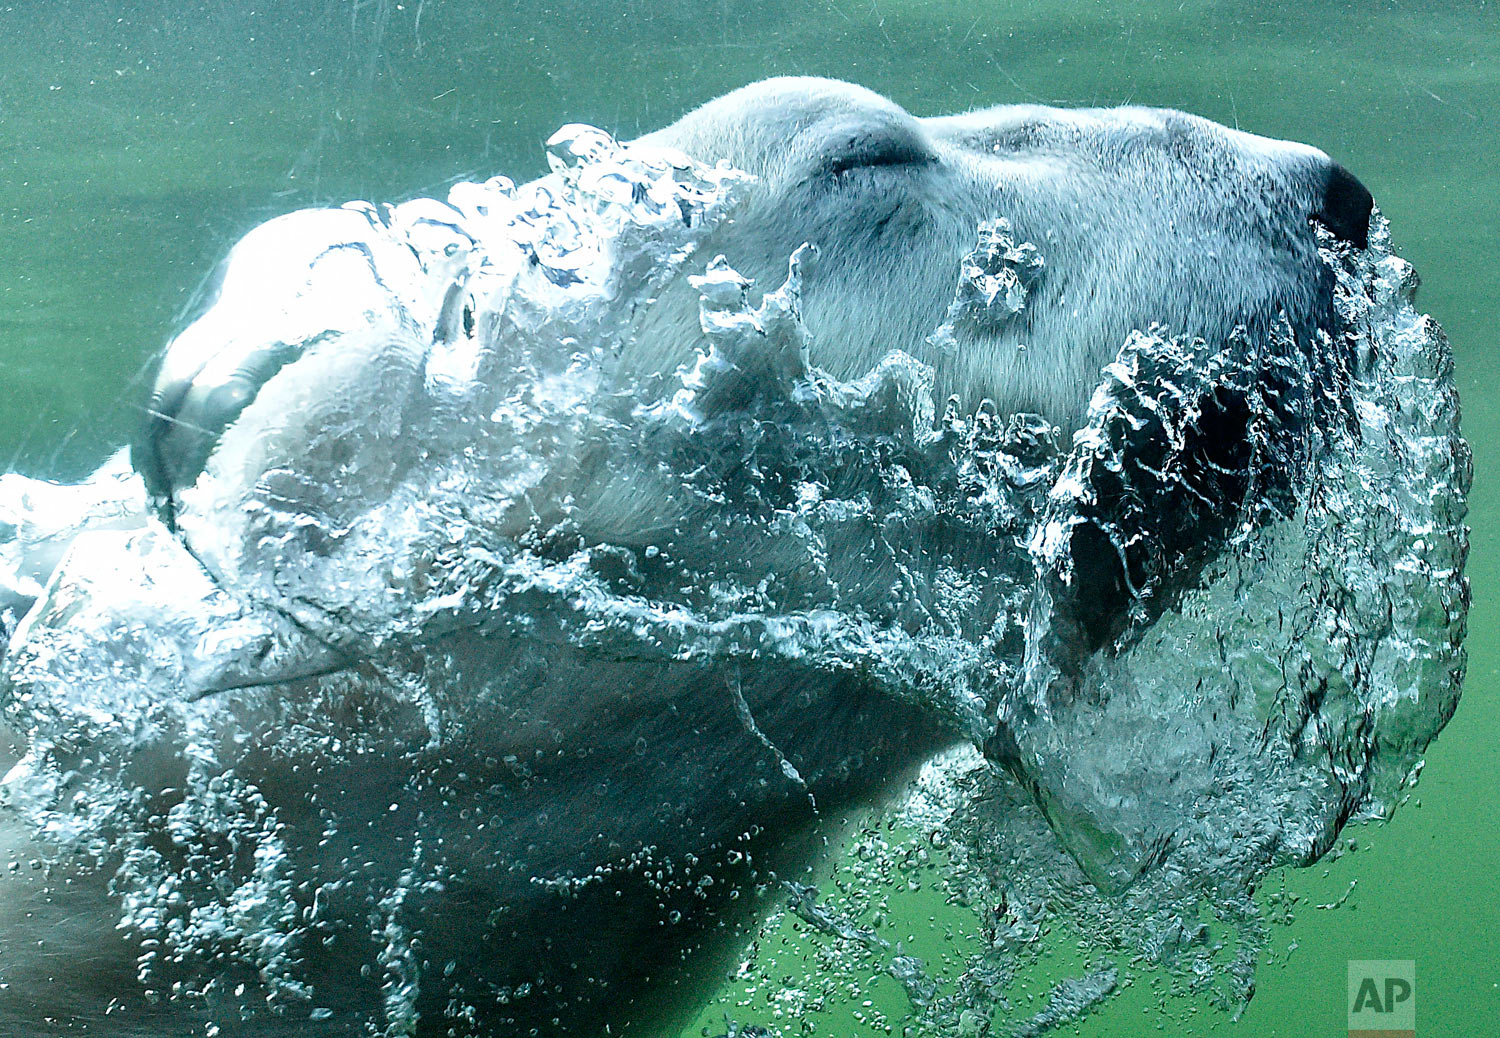  A polar bear blows bubbles as he swims through the water in an enclosure during warm late summer weather at the zoo in Gelsenkirchen, Germany, Tuesday, Oct. 16, 2018. (AP Photo/Martin Meissner) 